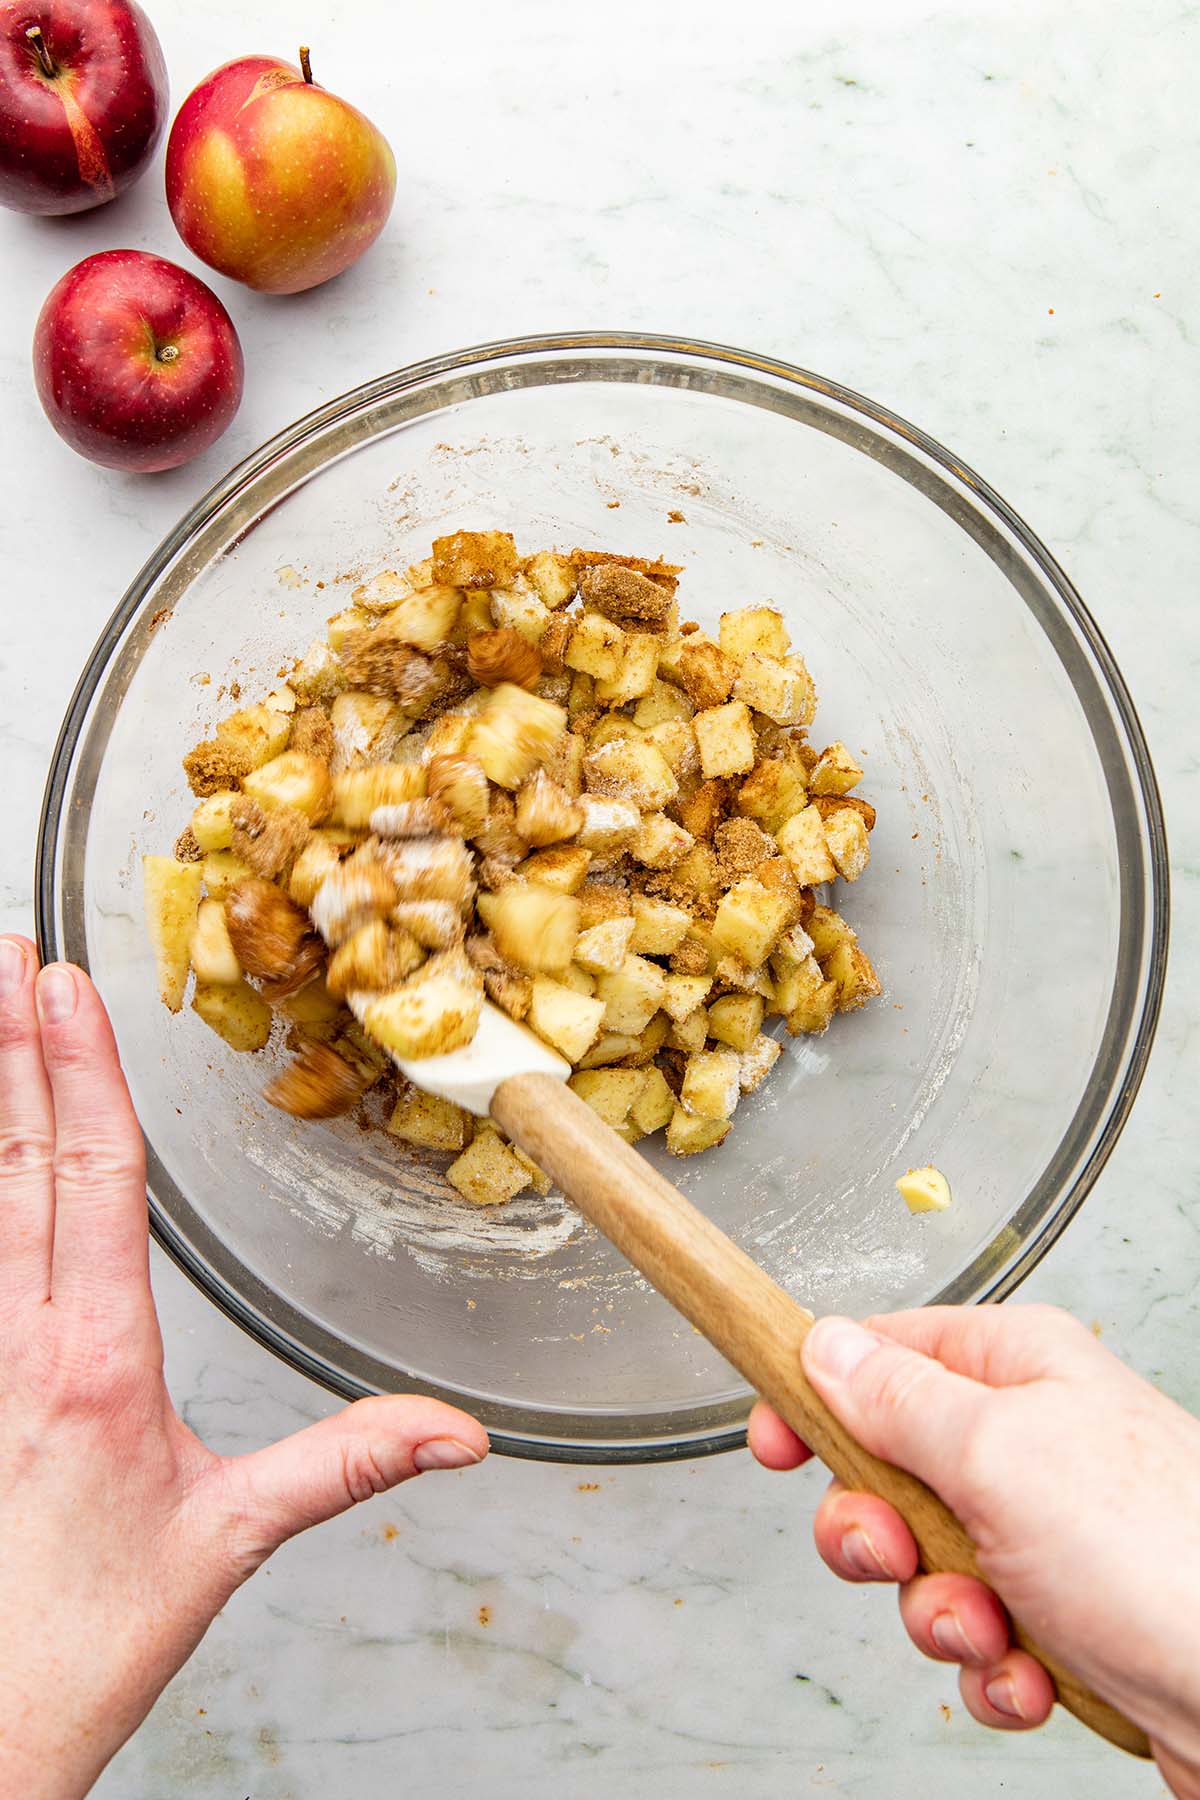 A hand using a rubber spatula to mix chopped apples, cinnamon, brown sugar, rye flour, and salt together in a large glass bowl.